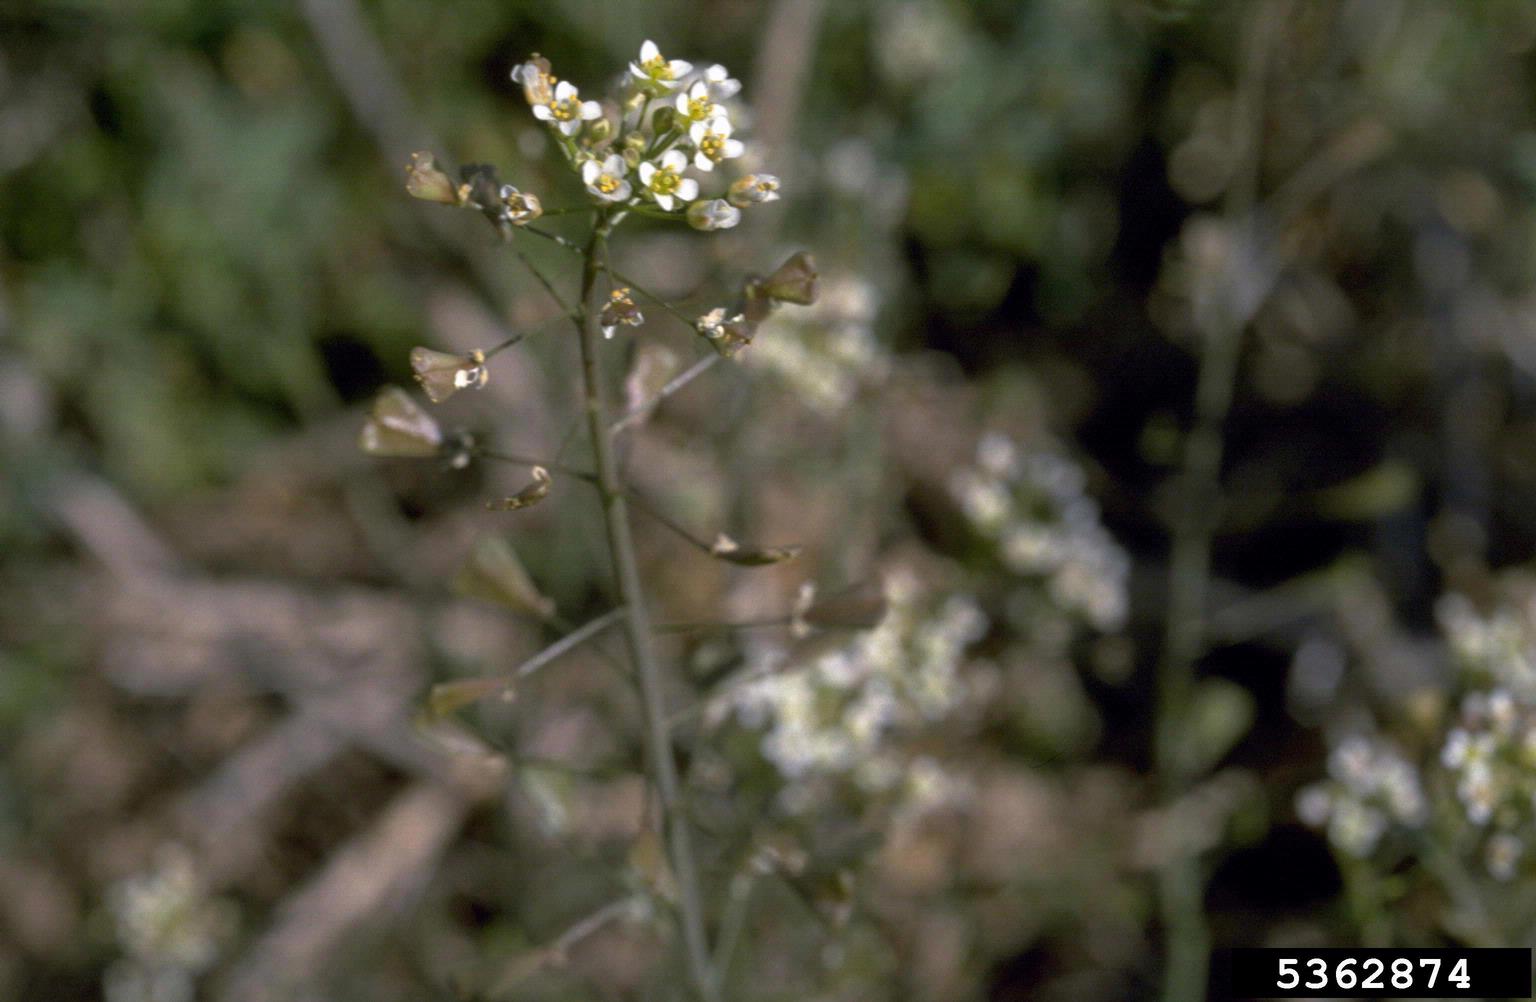 Capsella bursa-pastoris, shepherd's purse because of its triangular flat  fruits, which are purse-like, is a small annual and ruderal flowering plant  Stock Photo - Alamy